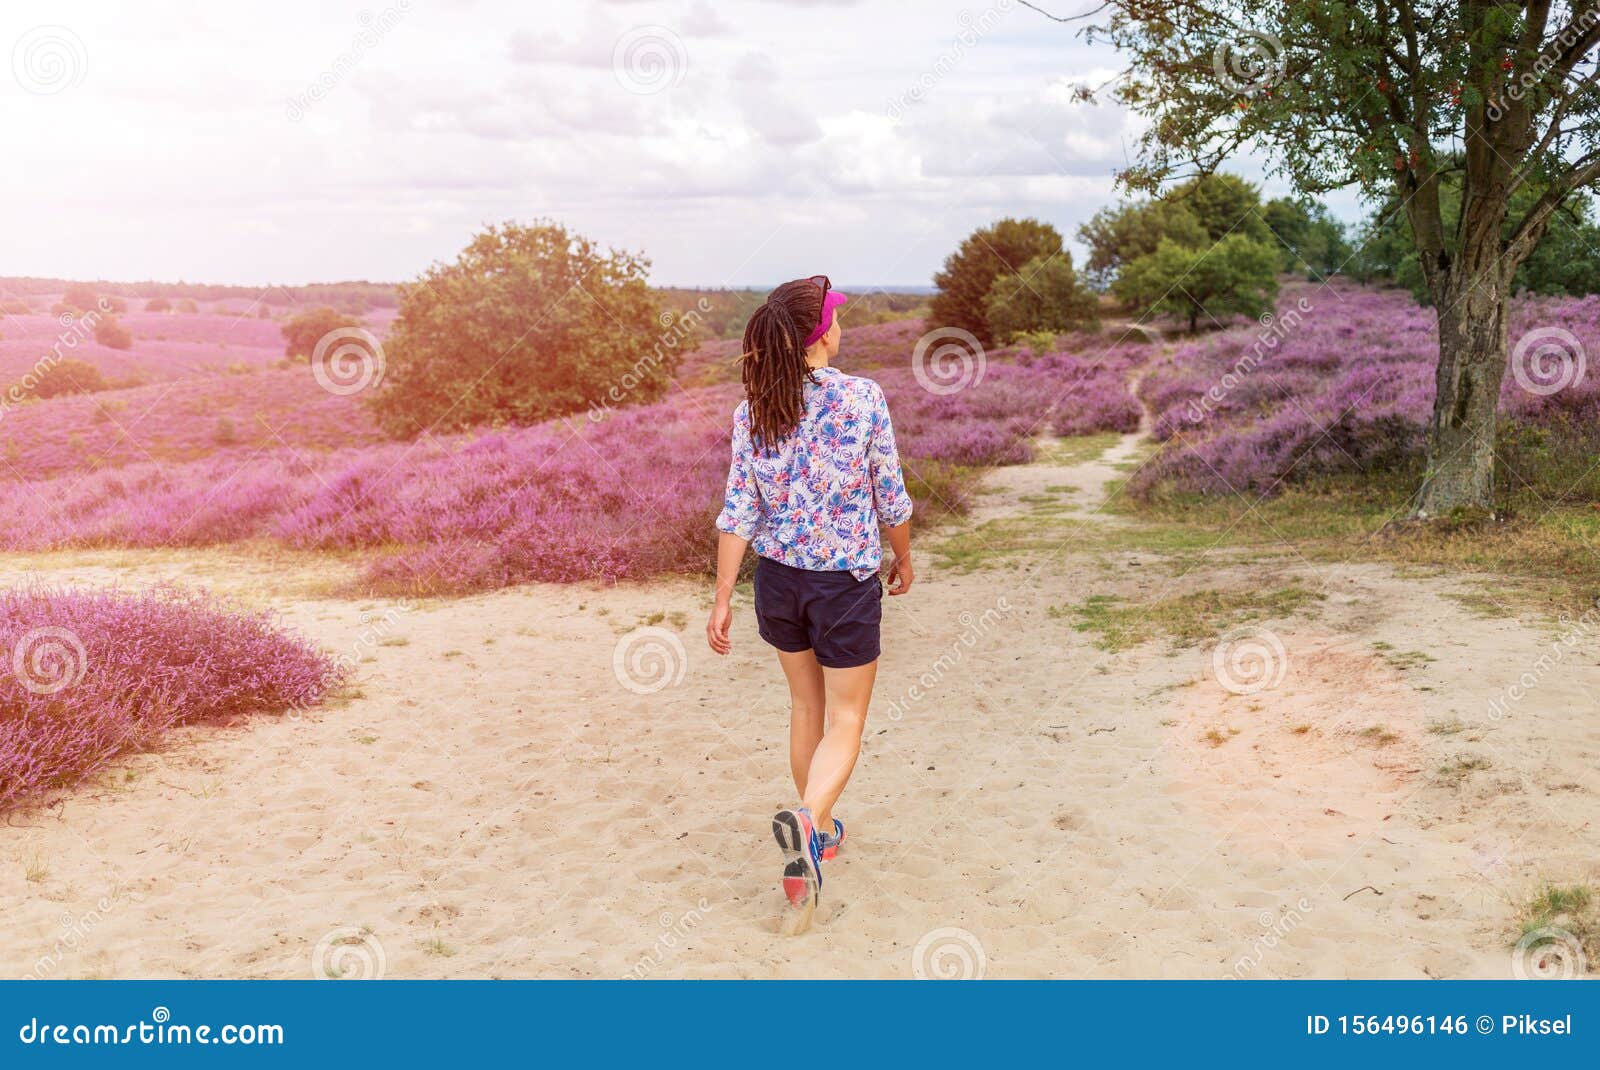 a female hiking along heather covered hills